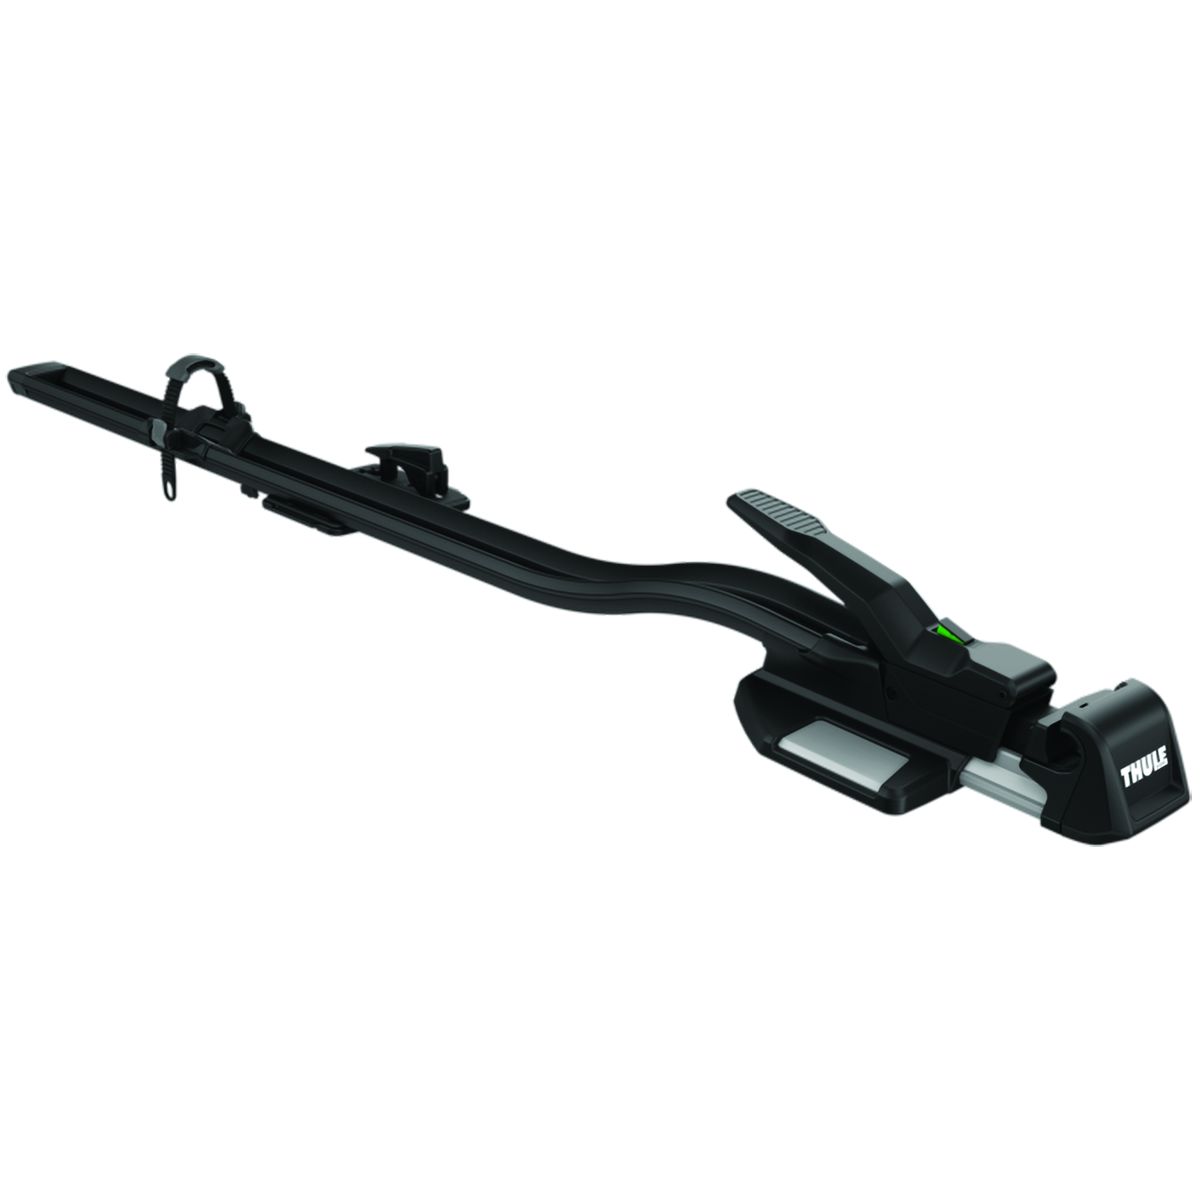 Thule 568005 - Topride Mount Carrier